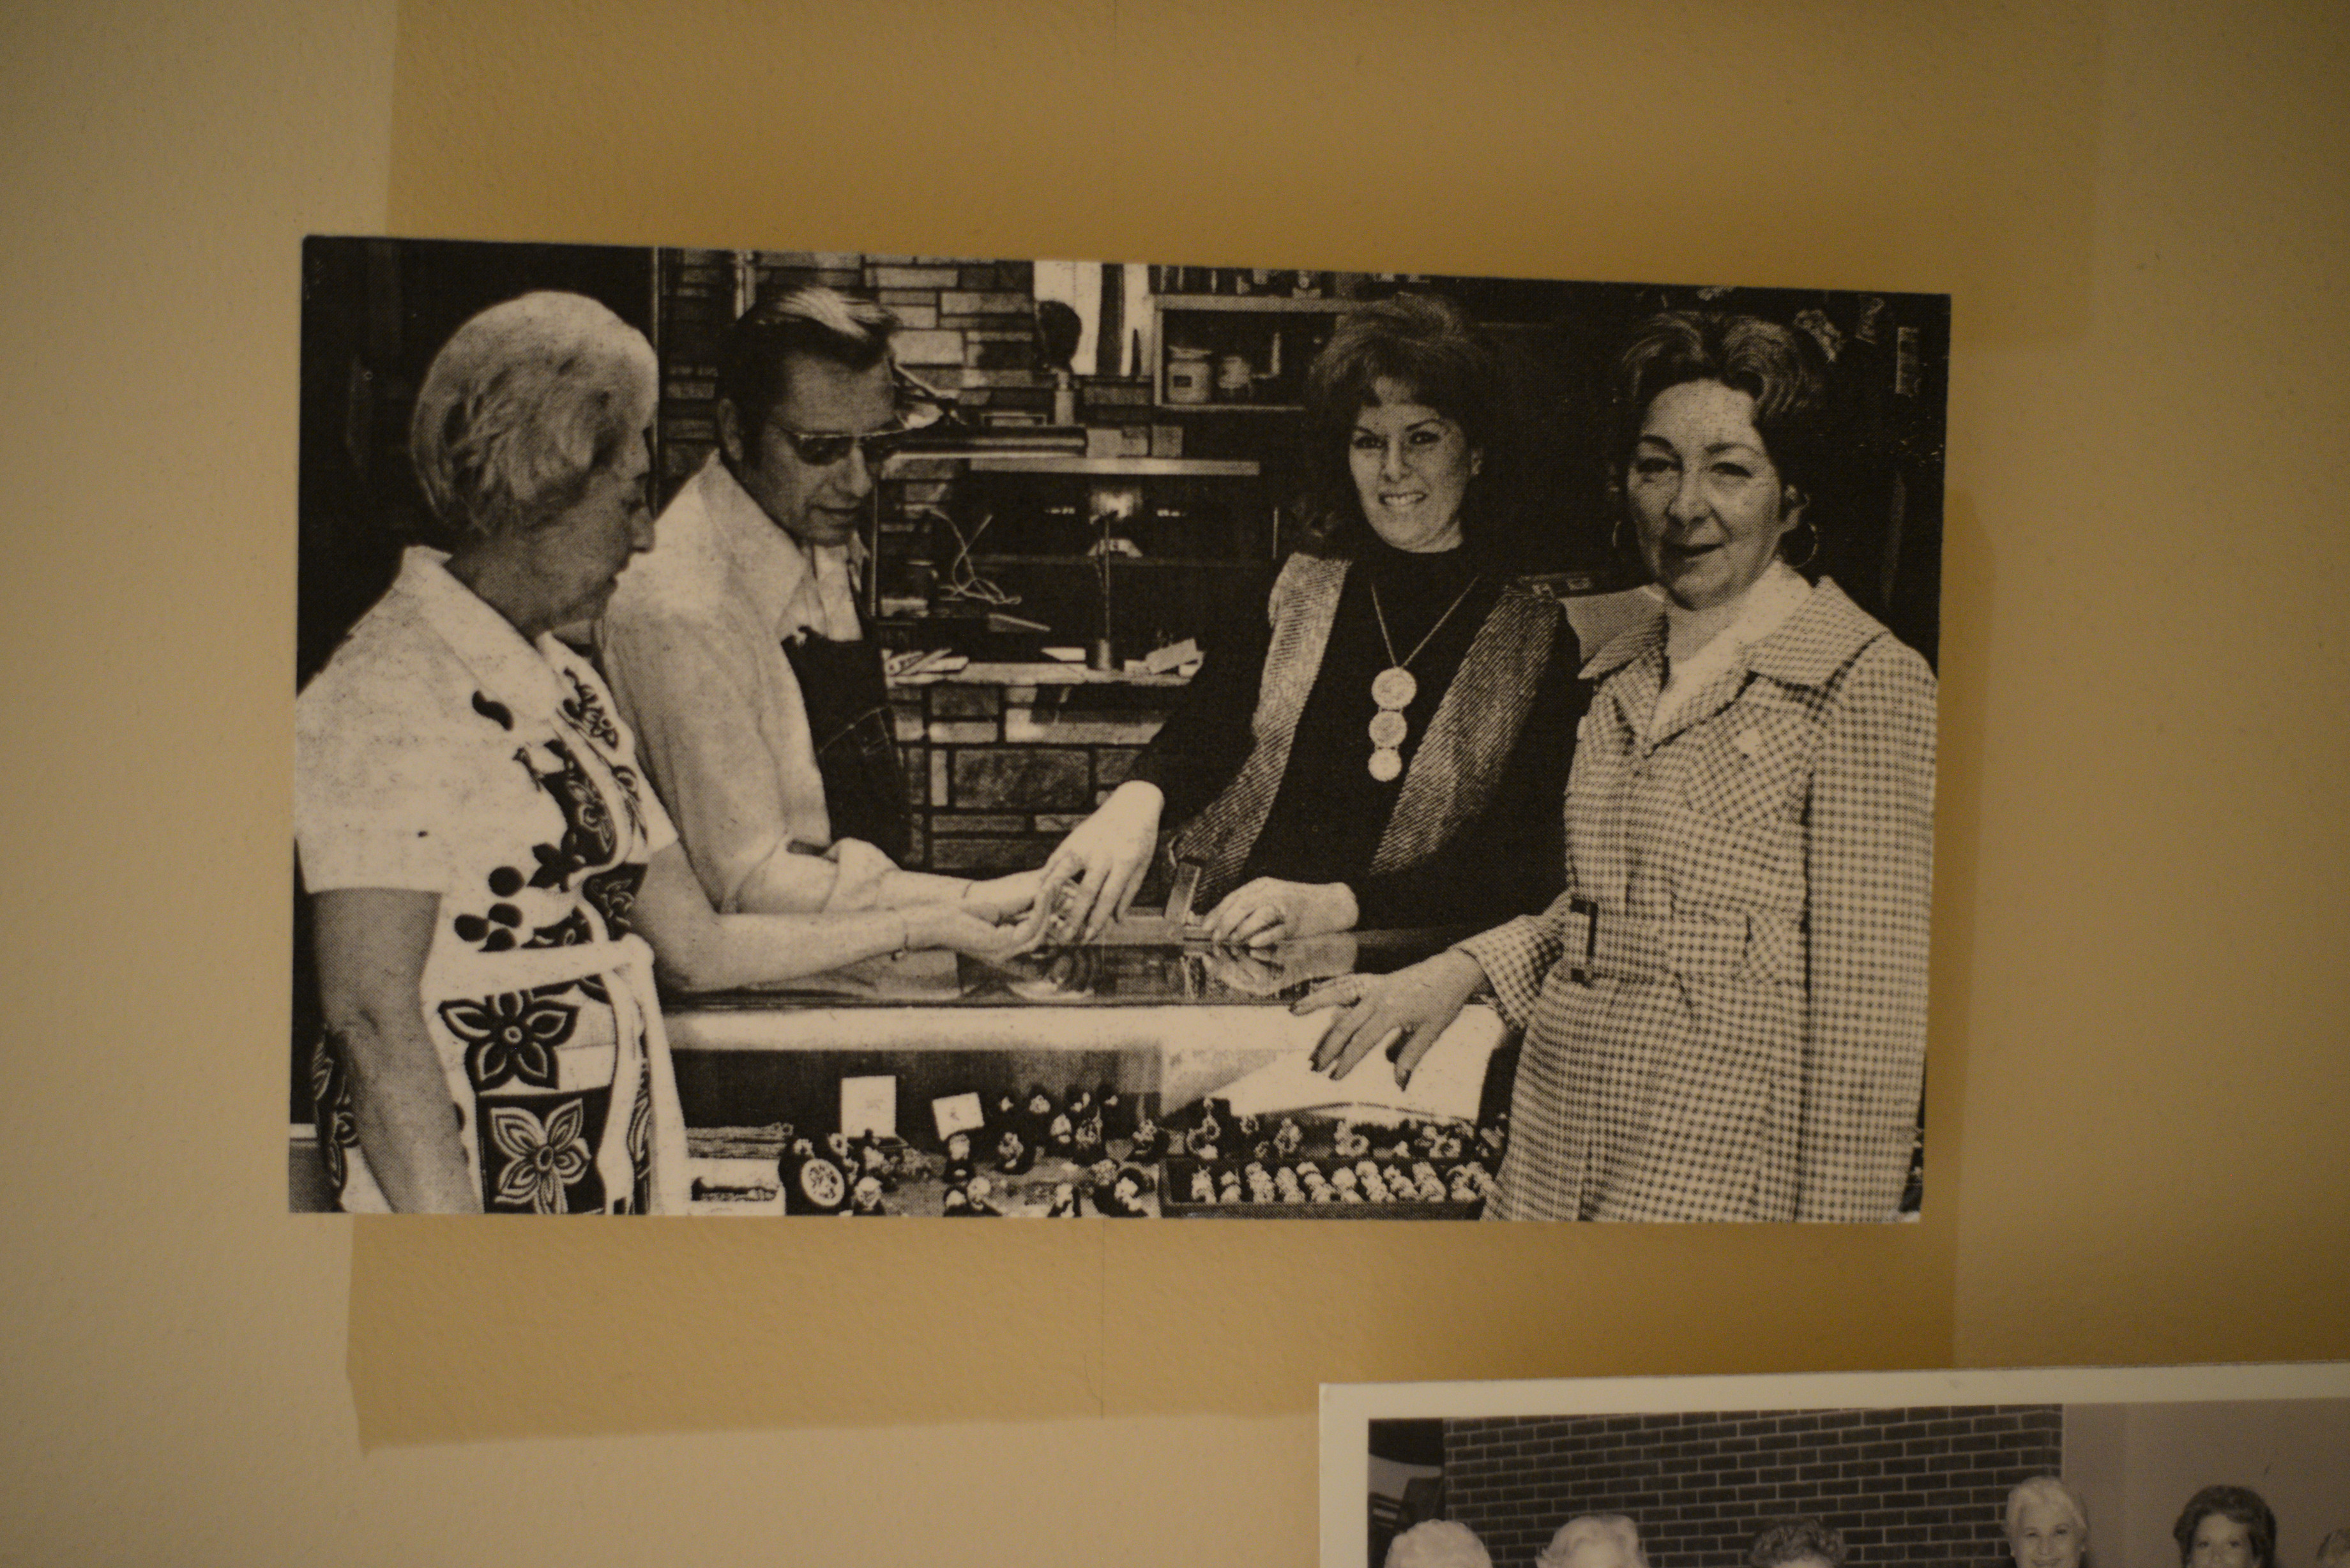 Photograph of a group of women at jewelry counter, date unknown